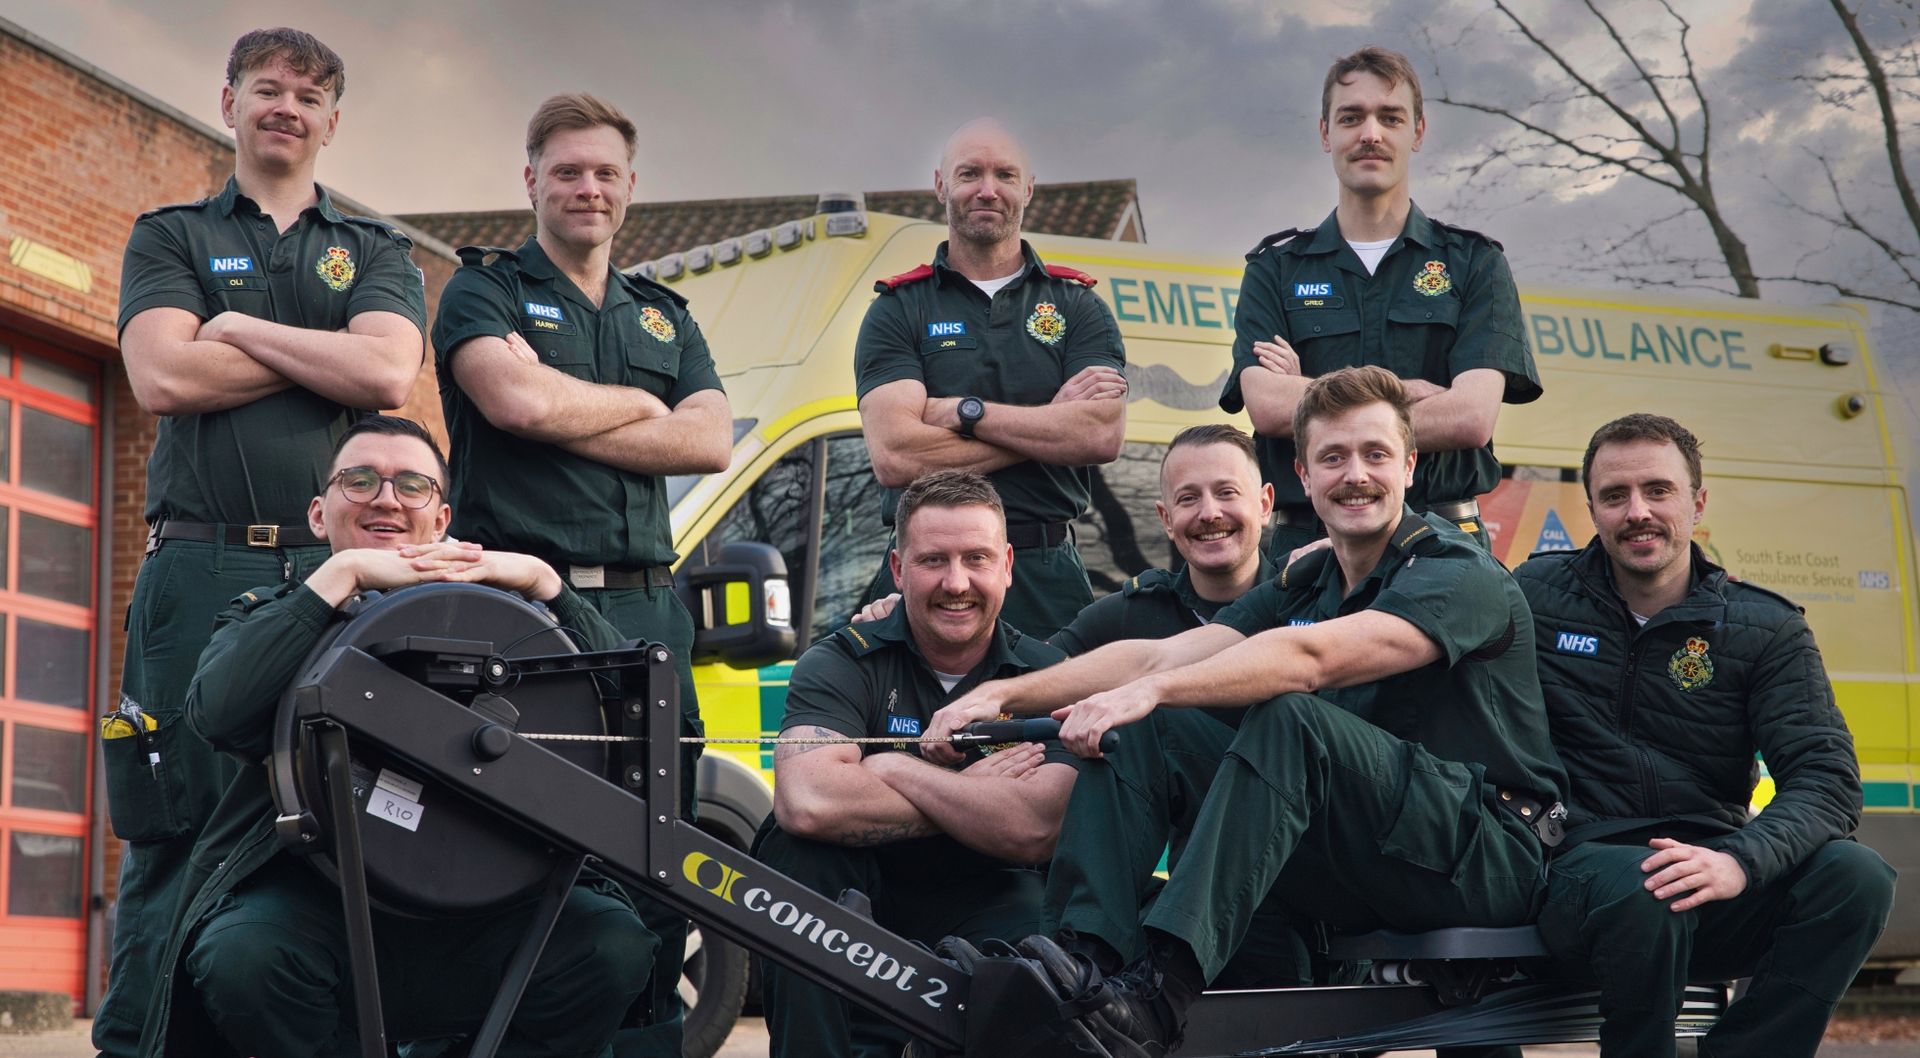 Ambulance service team standing around a rowing machine with an ambulance in the background